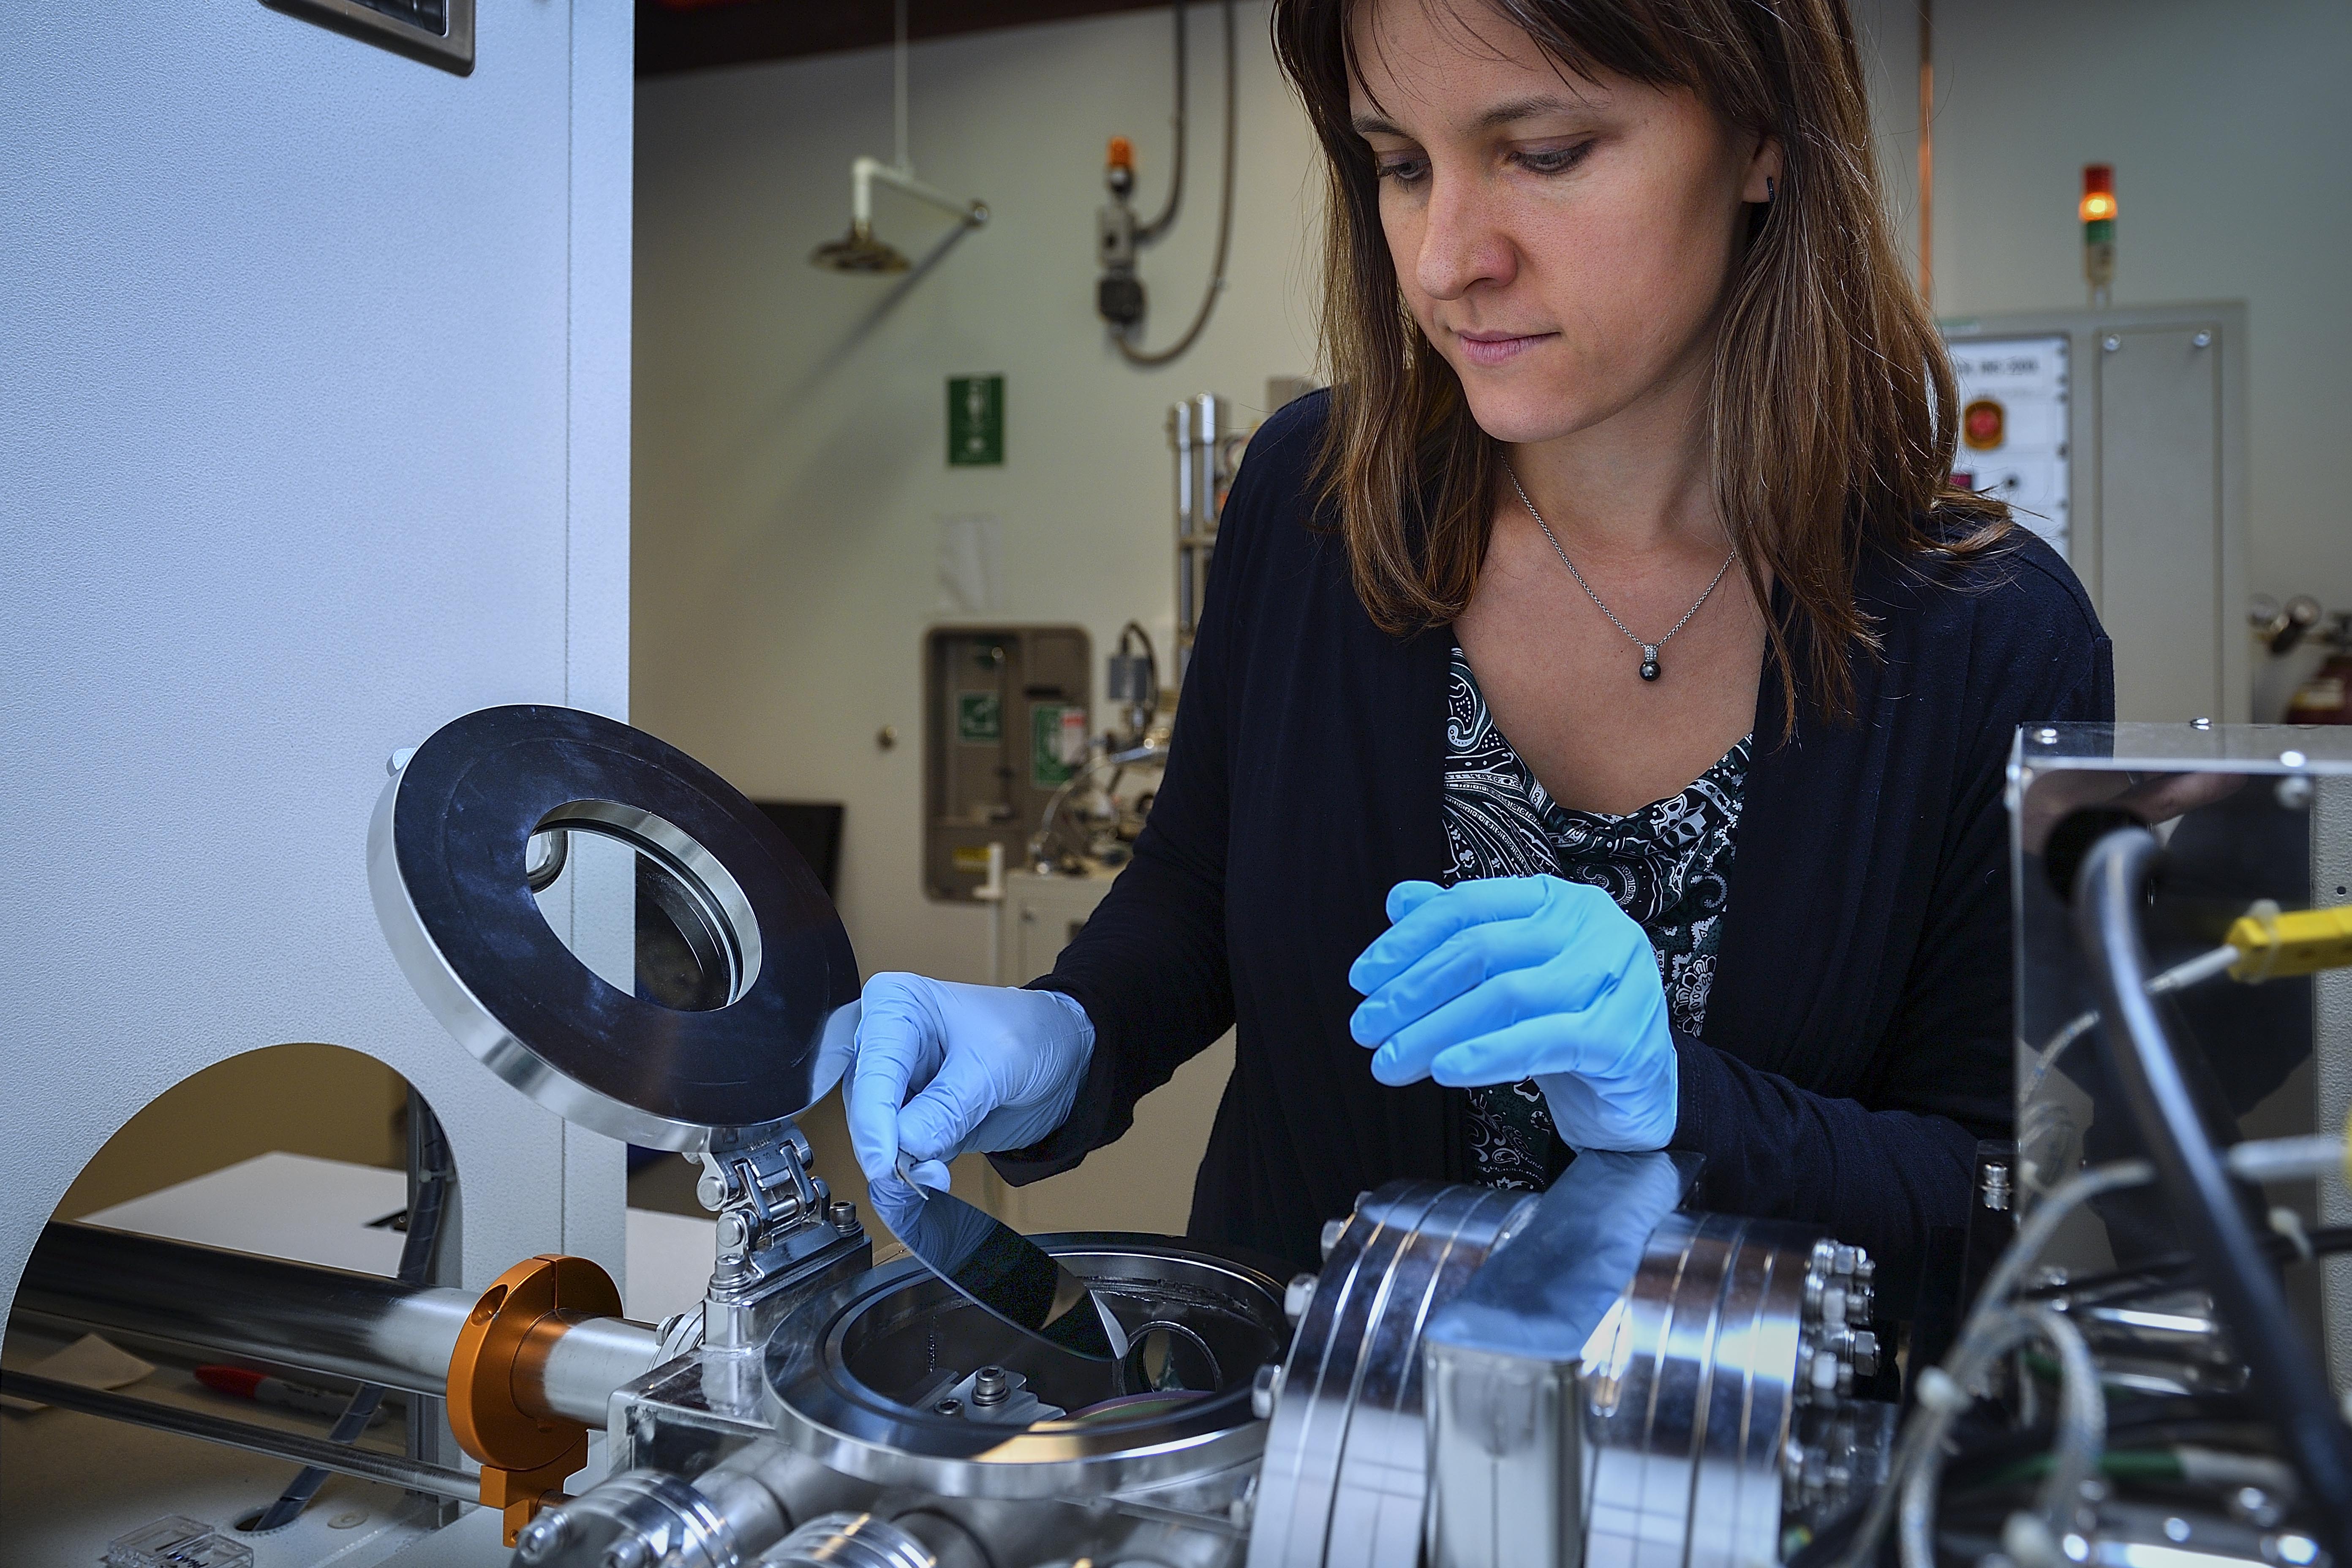 Diana Berman, a materials science professor in the College of Engineering, has created a simple coating with the potential to have a major impact and her work has just been published in the online journal ACS Nano.